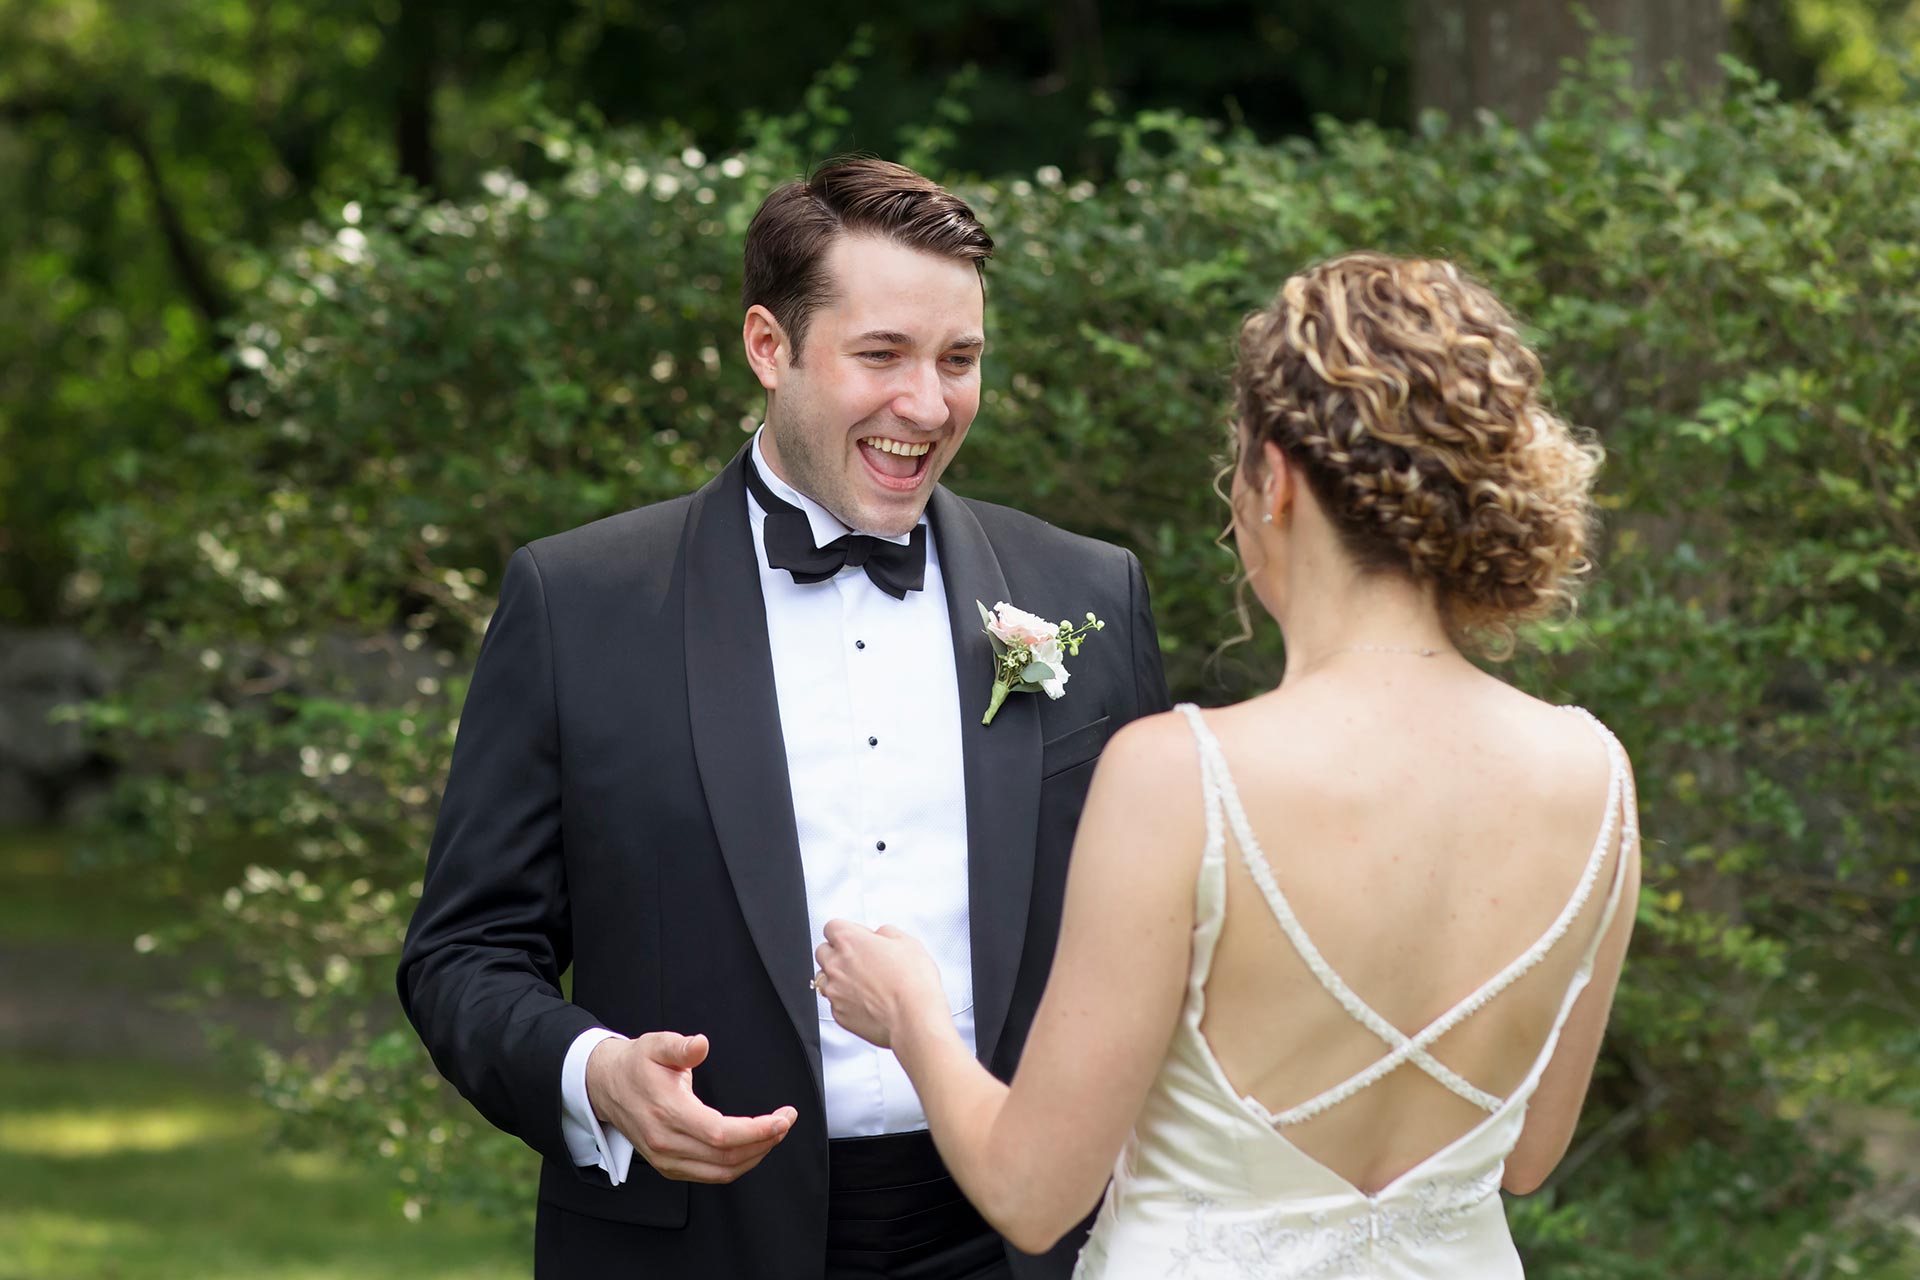 A groom's smiling face upon seeing the bride during a "first look" before their wedding Ceremony. First looks are a great way for couples to make sure that they get to spend the most time with their guests.